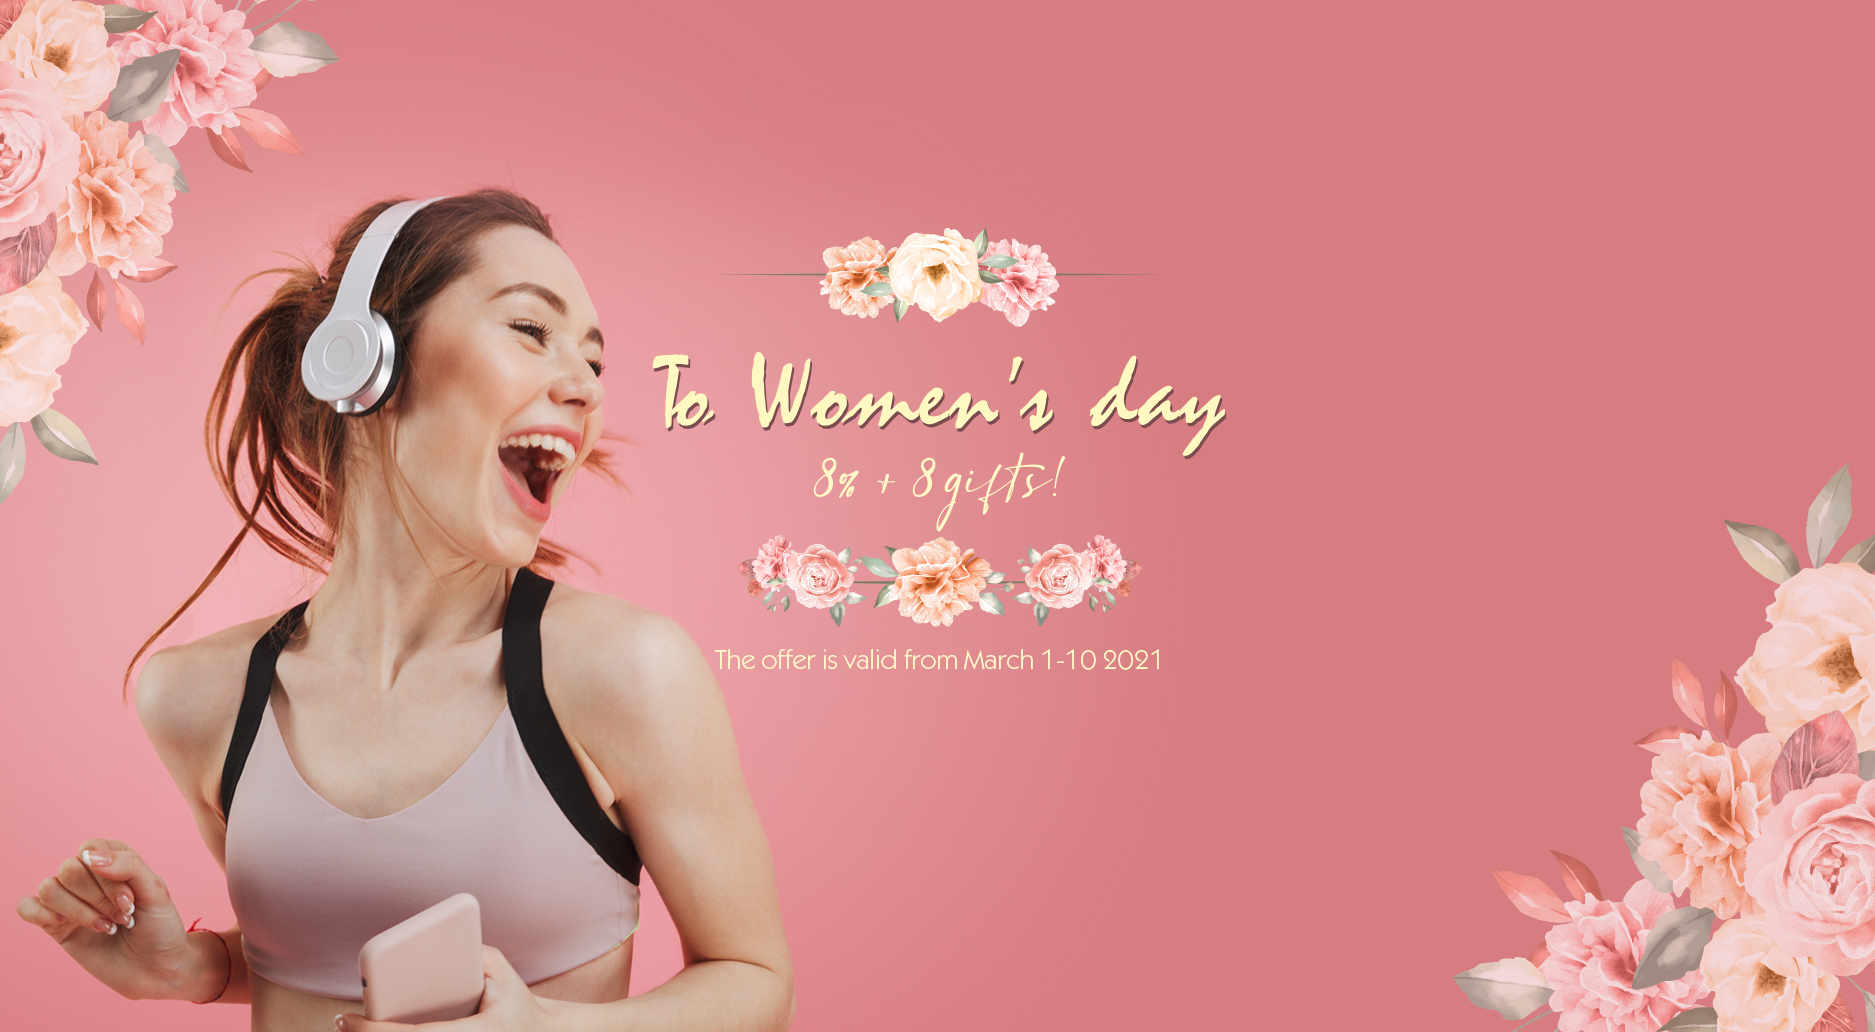 To Women's day 8% + 8 gifts!